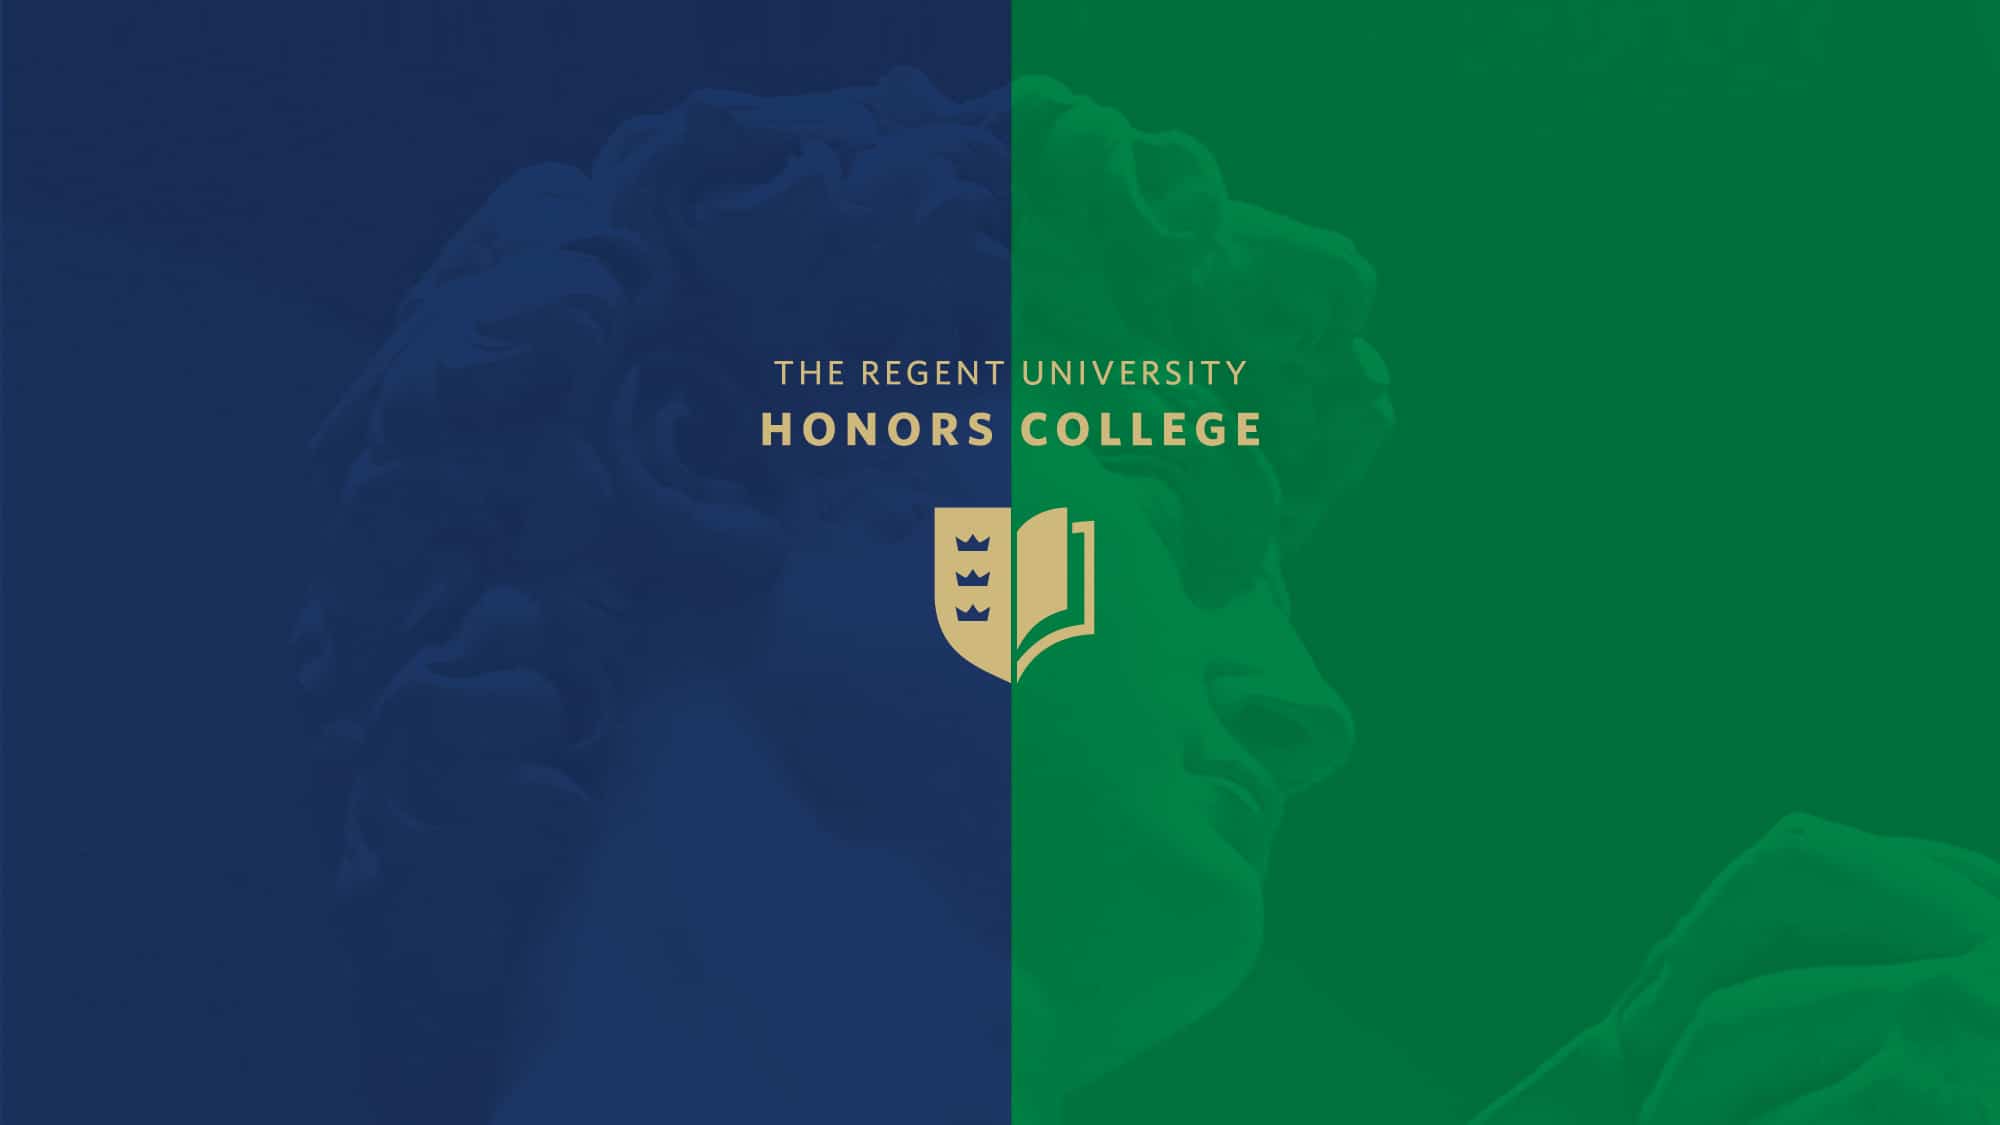 About Honors College Regent University